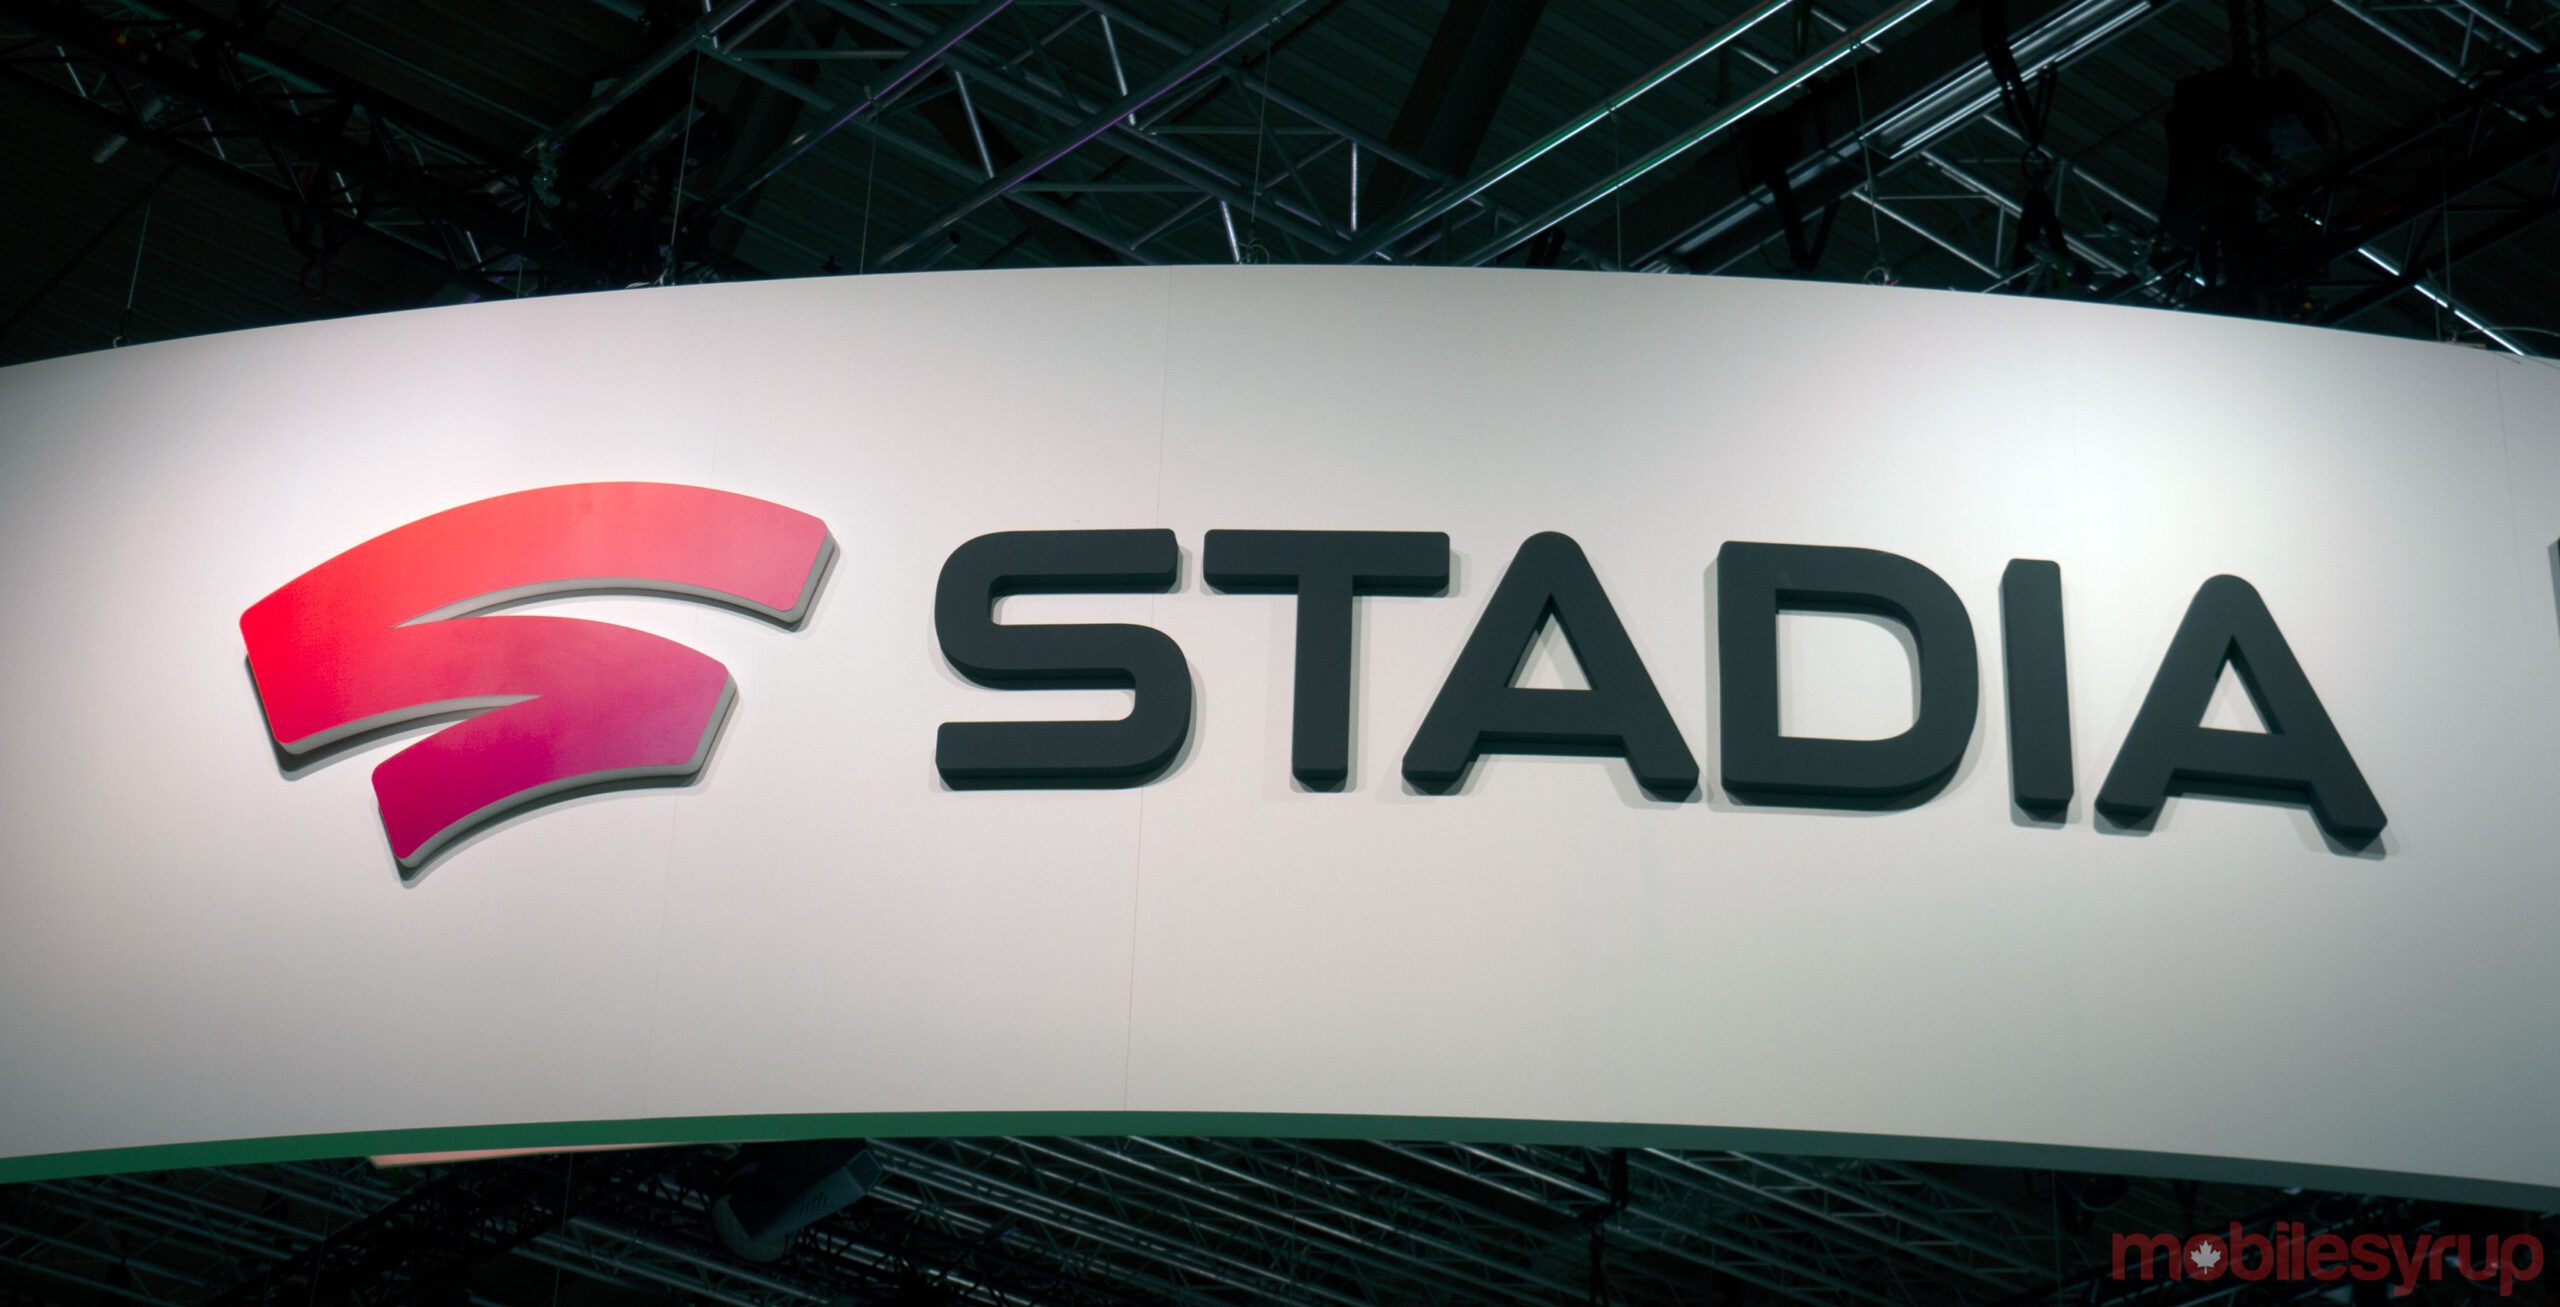 What Is Stadia?: Advertiser Q&A